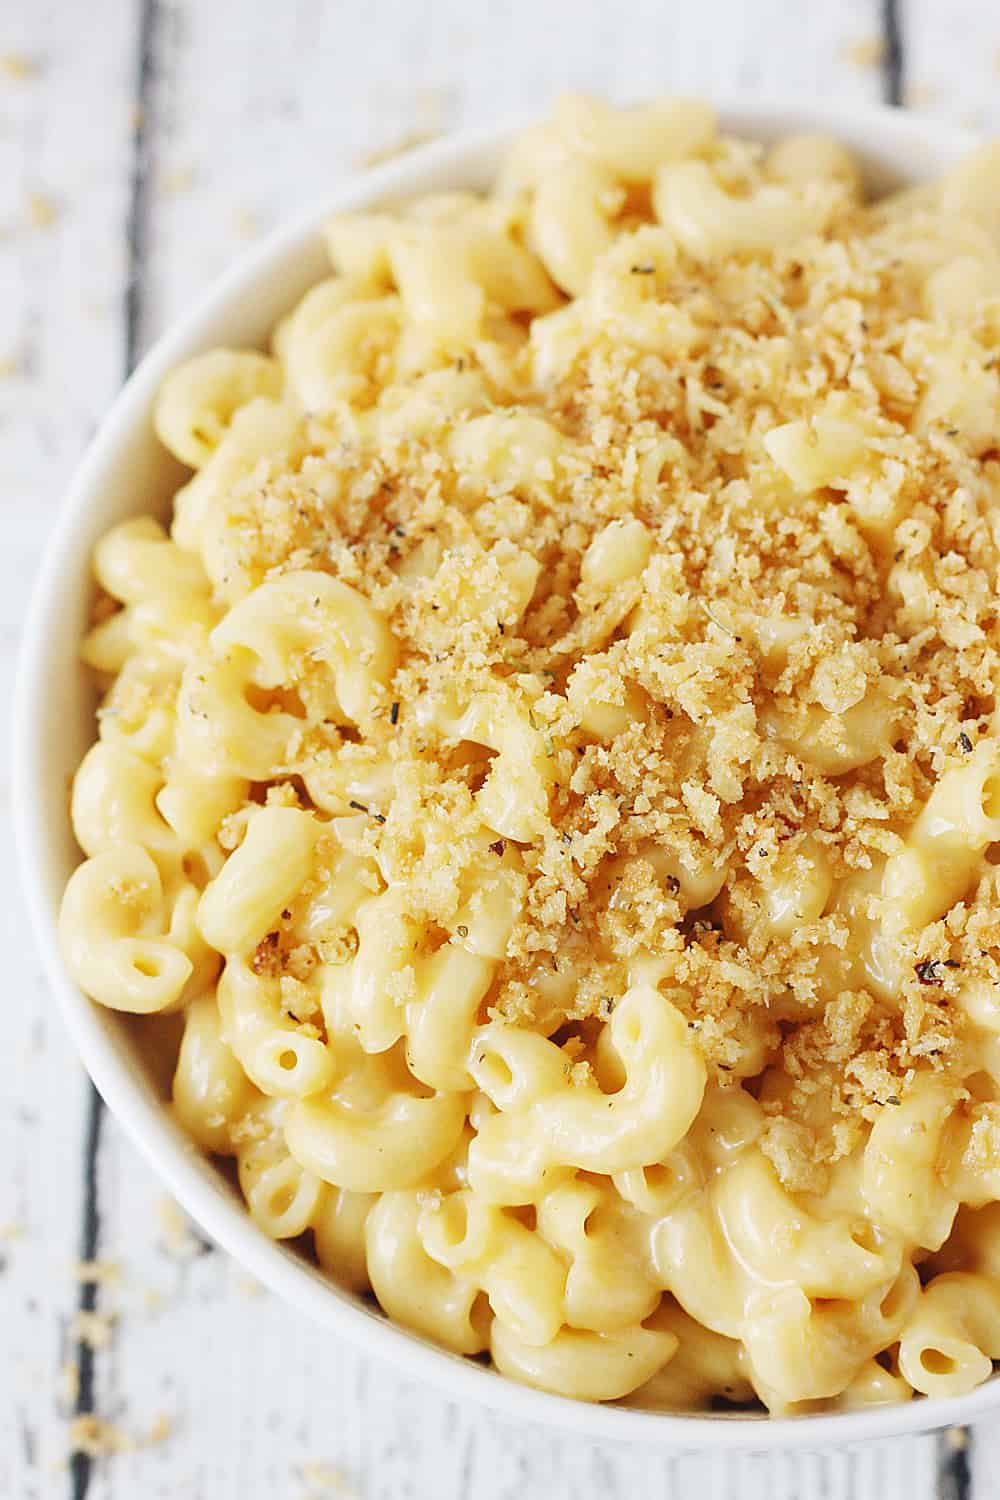 Easy Instant Pot Mac and Cheese - This easy Instant Pot mac and cheese is the creamiest, cheesiest, downright most delicious Instant Pot mac and cheese recipe ever! #macandcheese #instantpot #pressurecooker #macaroniandcheese #pasta #easyrecipe #recipe #cooking #halfscratched #ad #jarlsberg #cheese